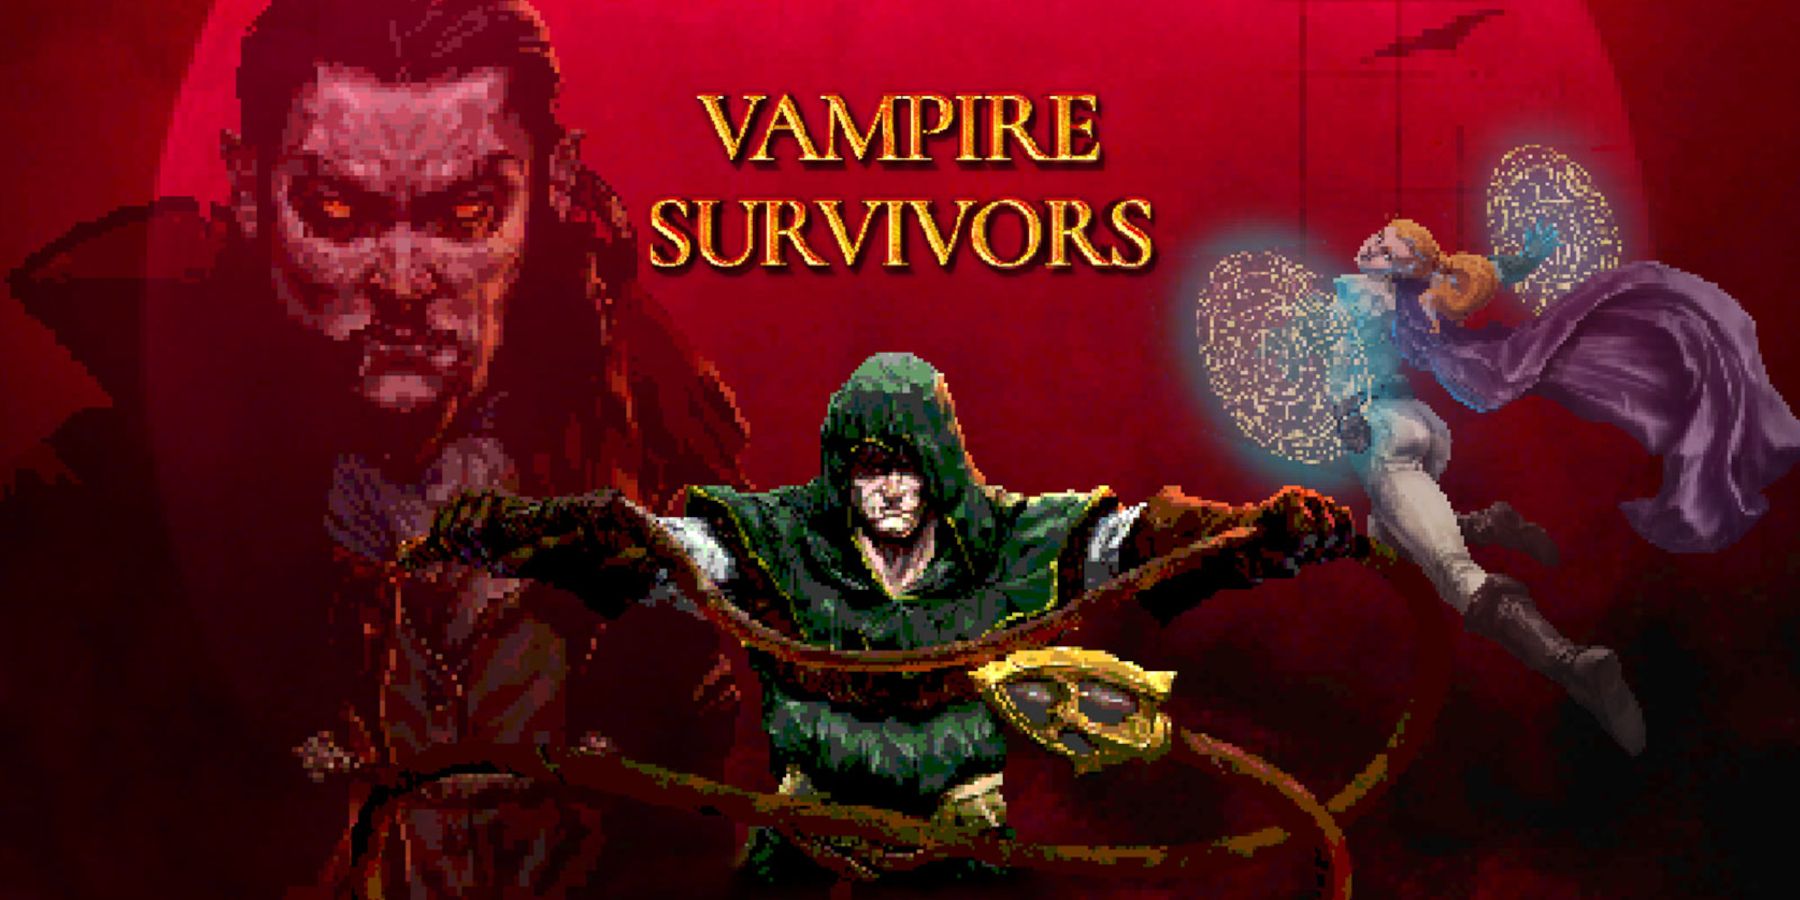 Vampire Survivors Version 1.8 Guide – Here's How To Unlock Adventure Mode  and What's Included – TouchArcade